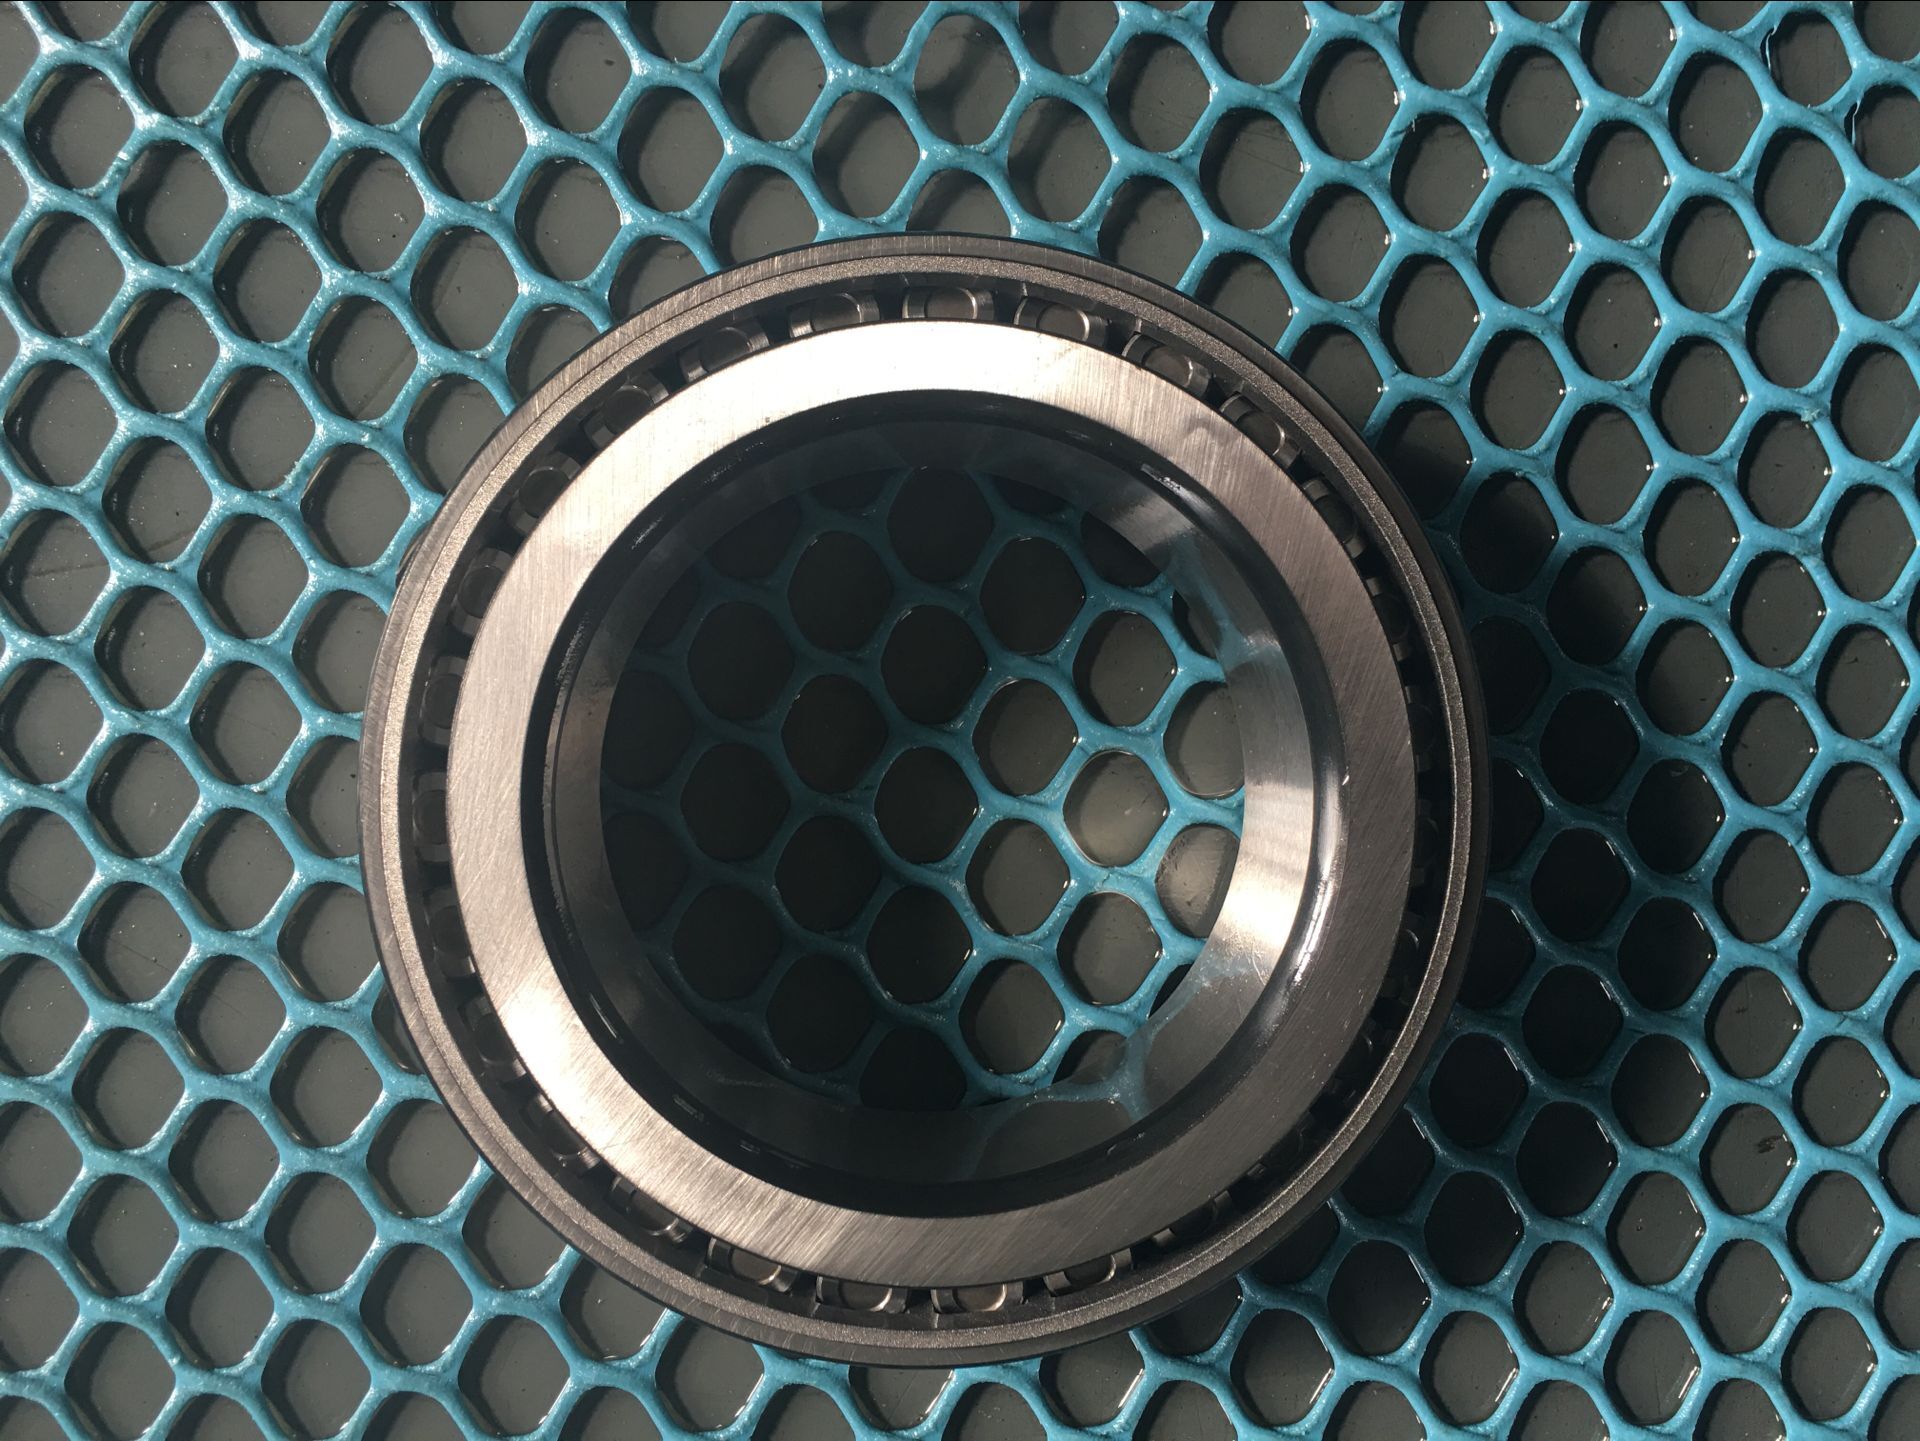 GOST 520-2011 Taper Roller Bearing 27320 27321 27322 27324 27326 27328 27330 for Russia